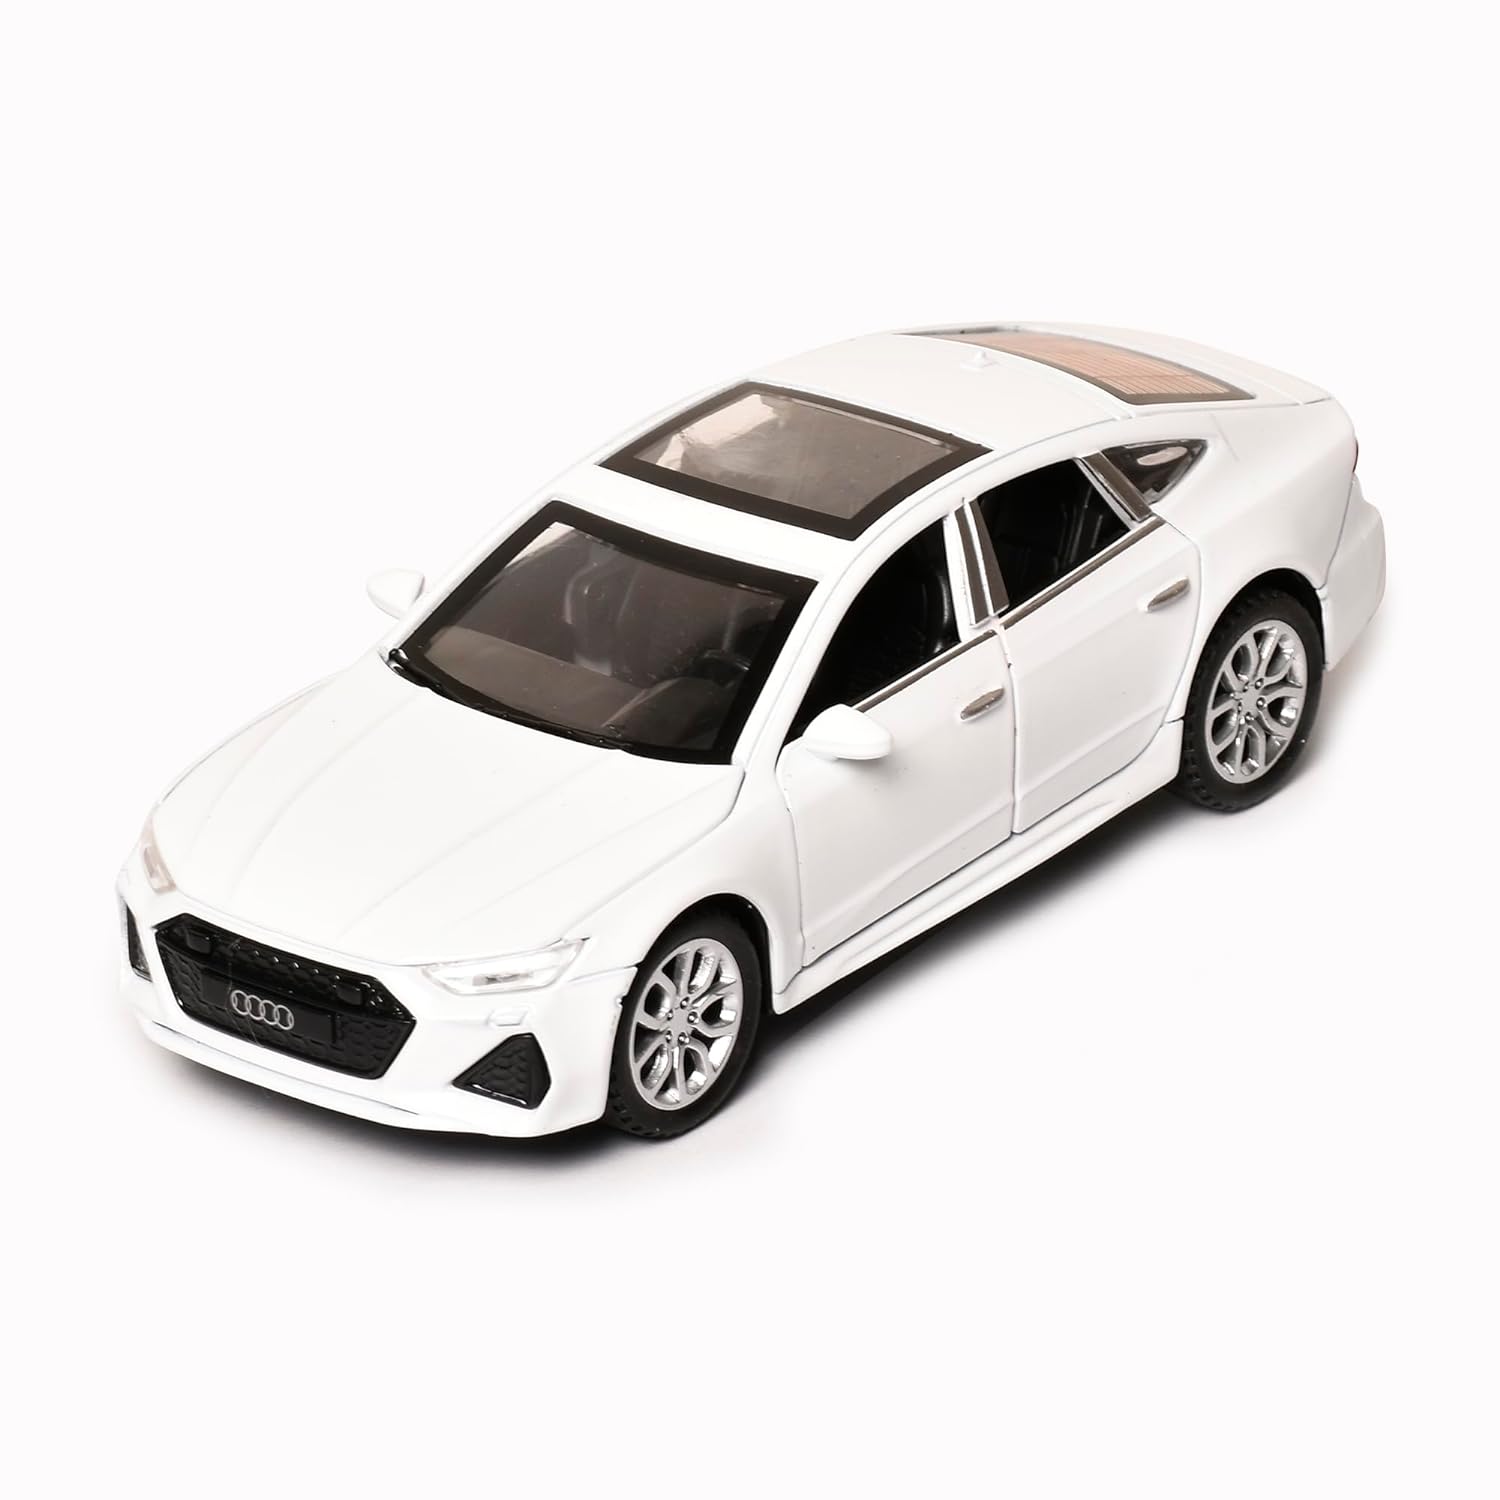 Braintastic Model Diecast Car Toy Vehicle Pull Back Friction Car with Openable Doors Light & Music Toys for Kids Age 3+ Years (AK Metal Series Audi White)